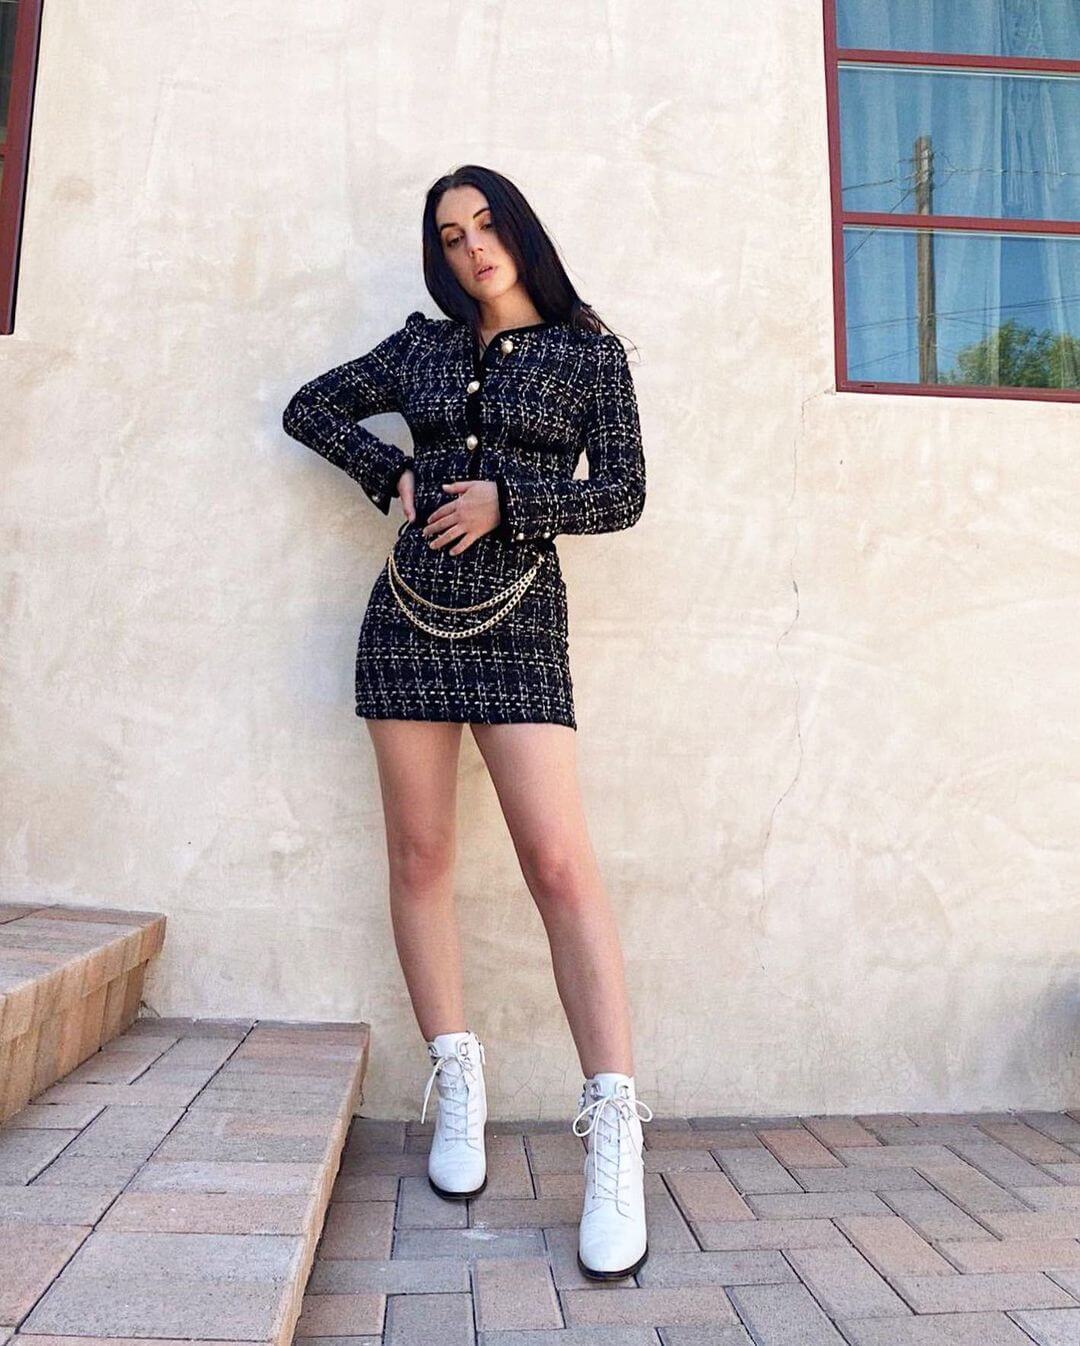 Adelaide Kane Look Effortlessly Gorgeous In Black Co-Ord Set With White High Boots